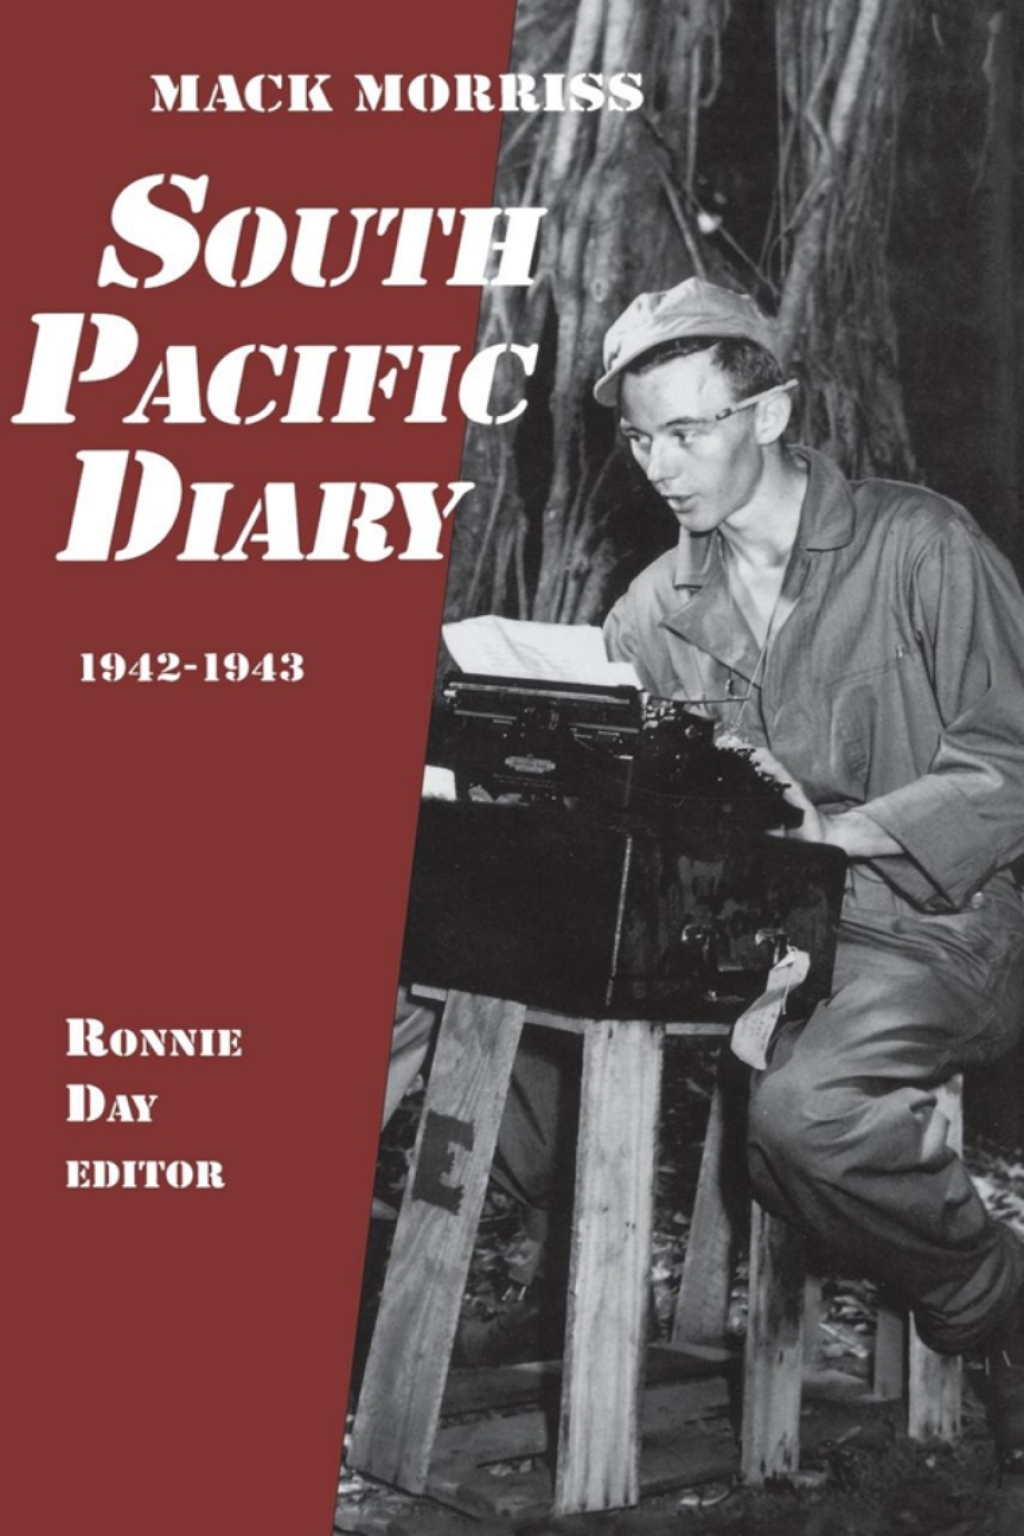 South Pacific Diary  1942-1943 (eBook) - Mack Morriss